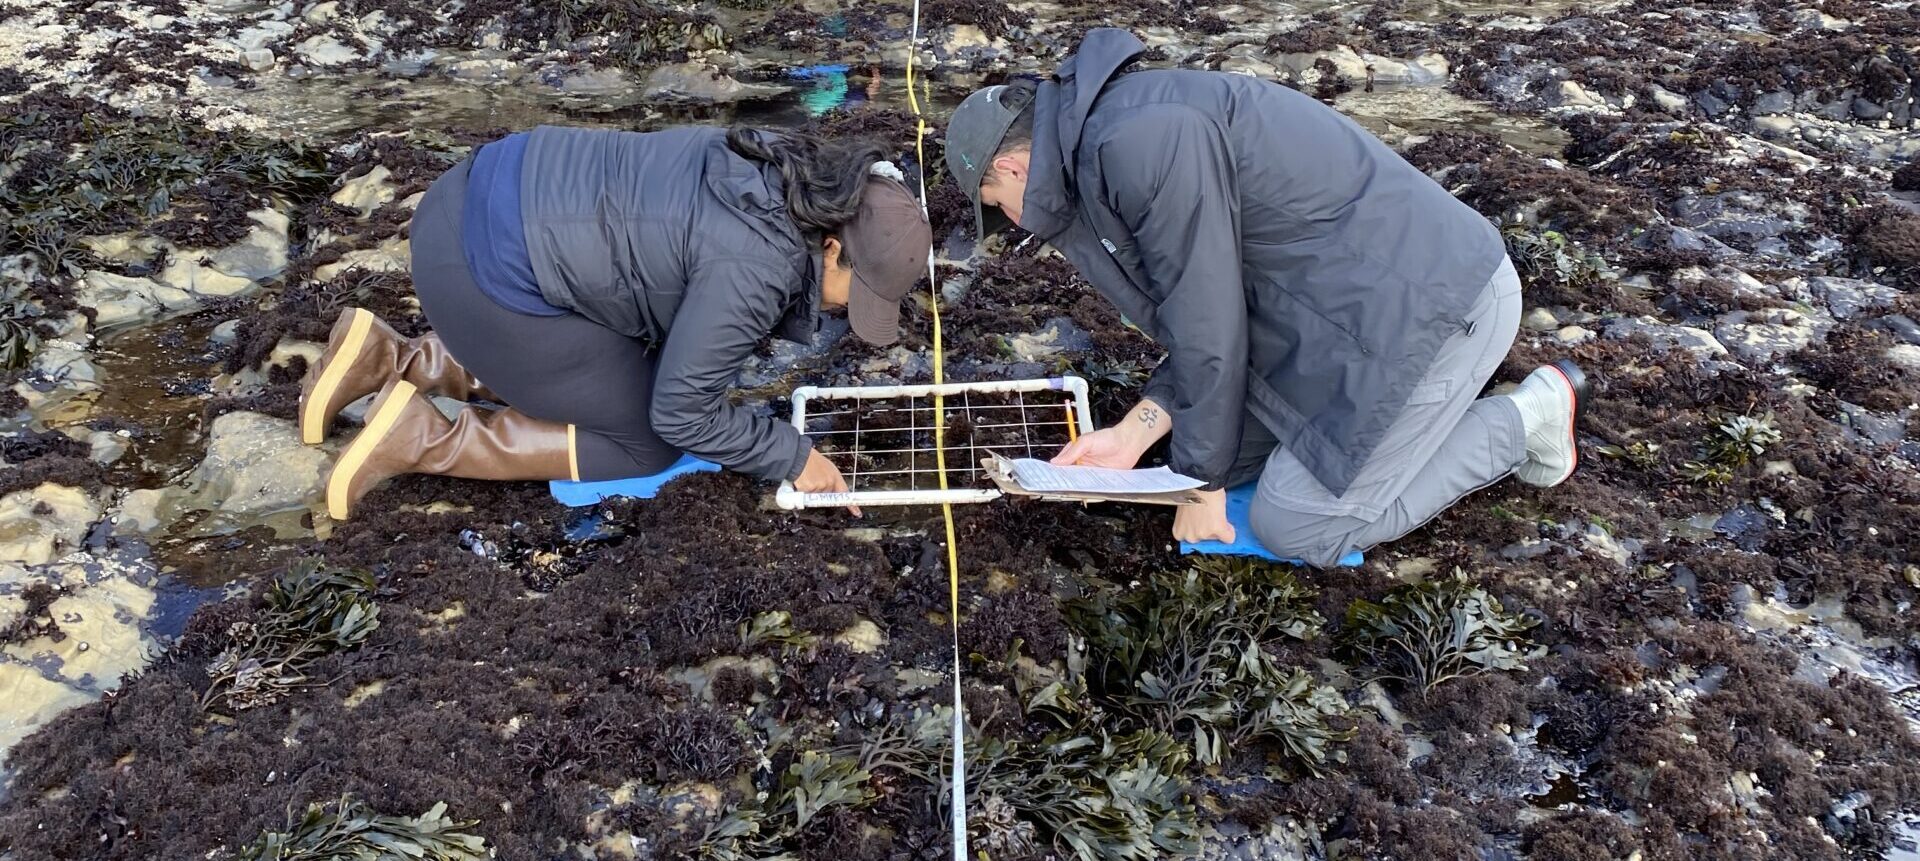 Folks conducting transect work in the rocky intertidal.